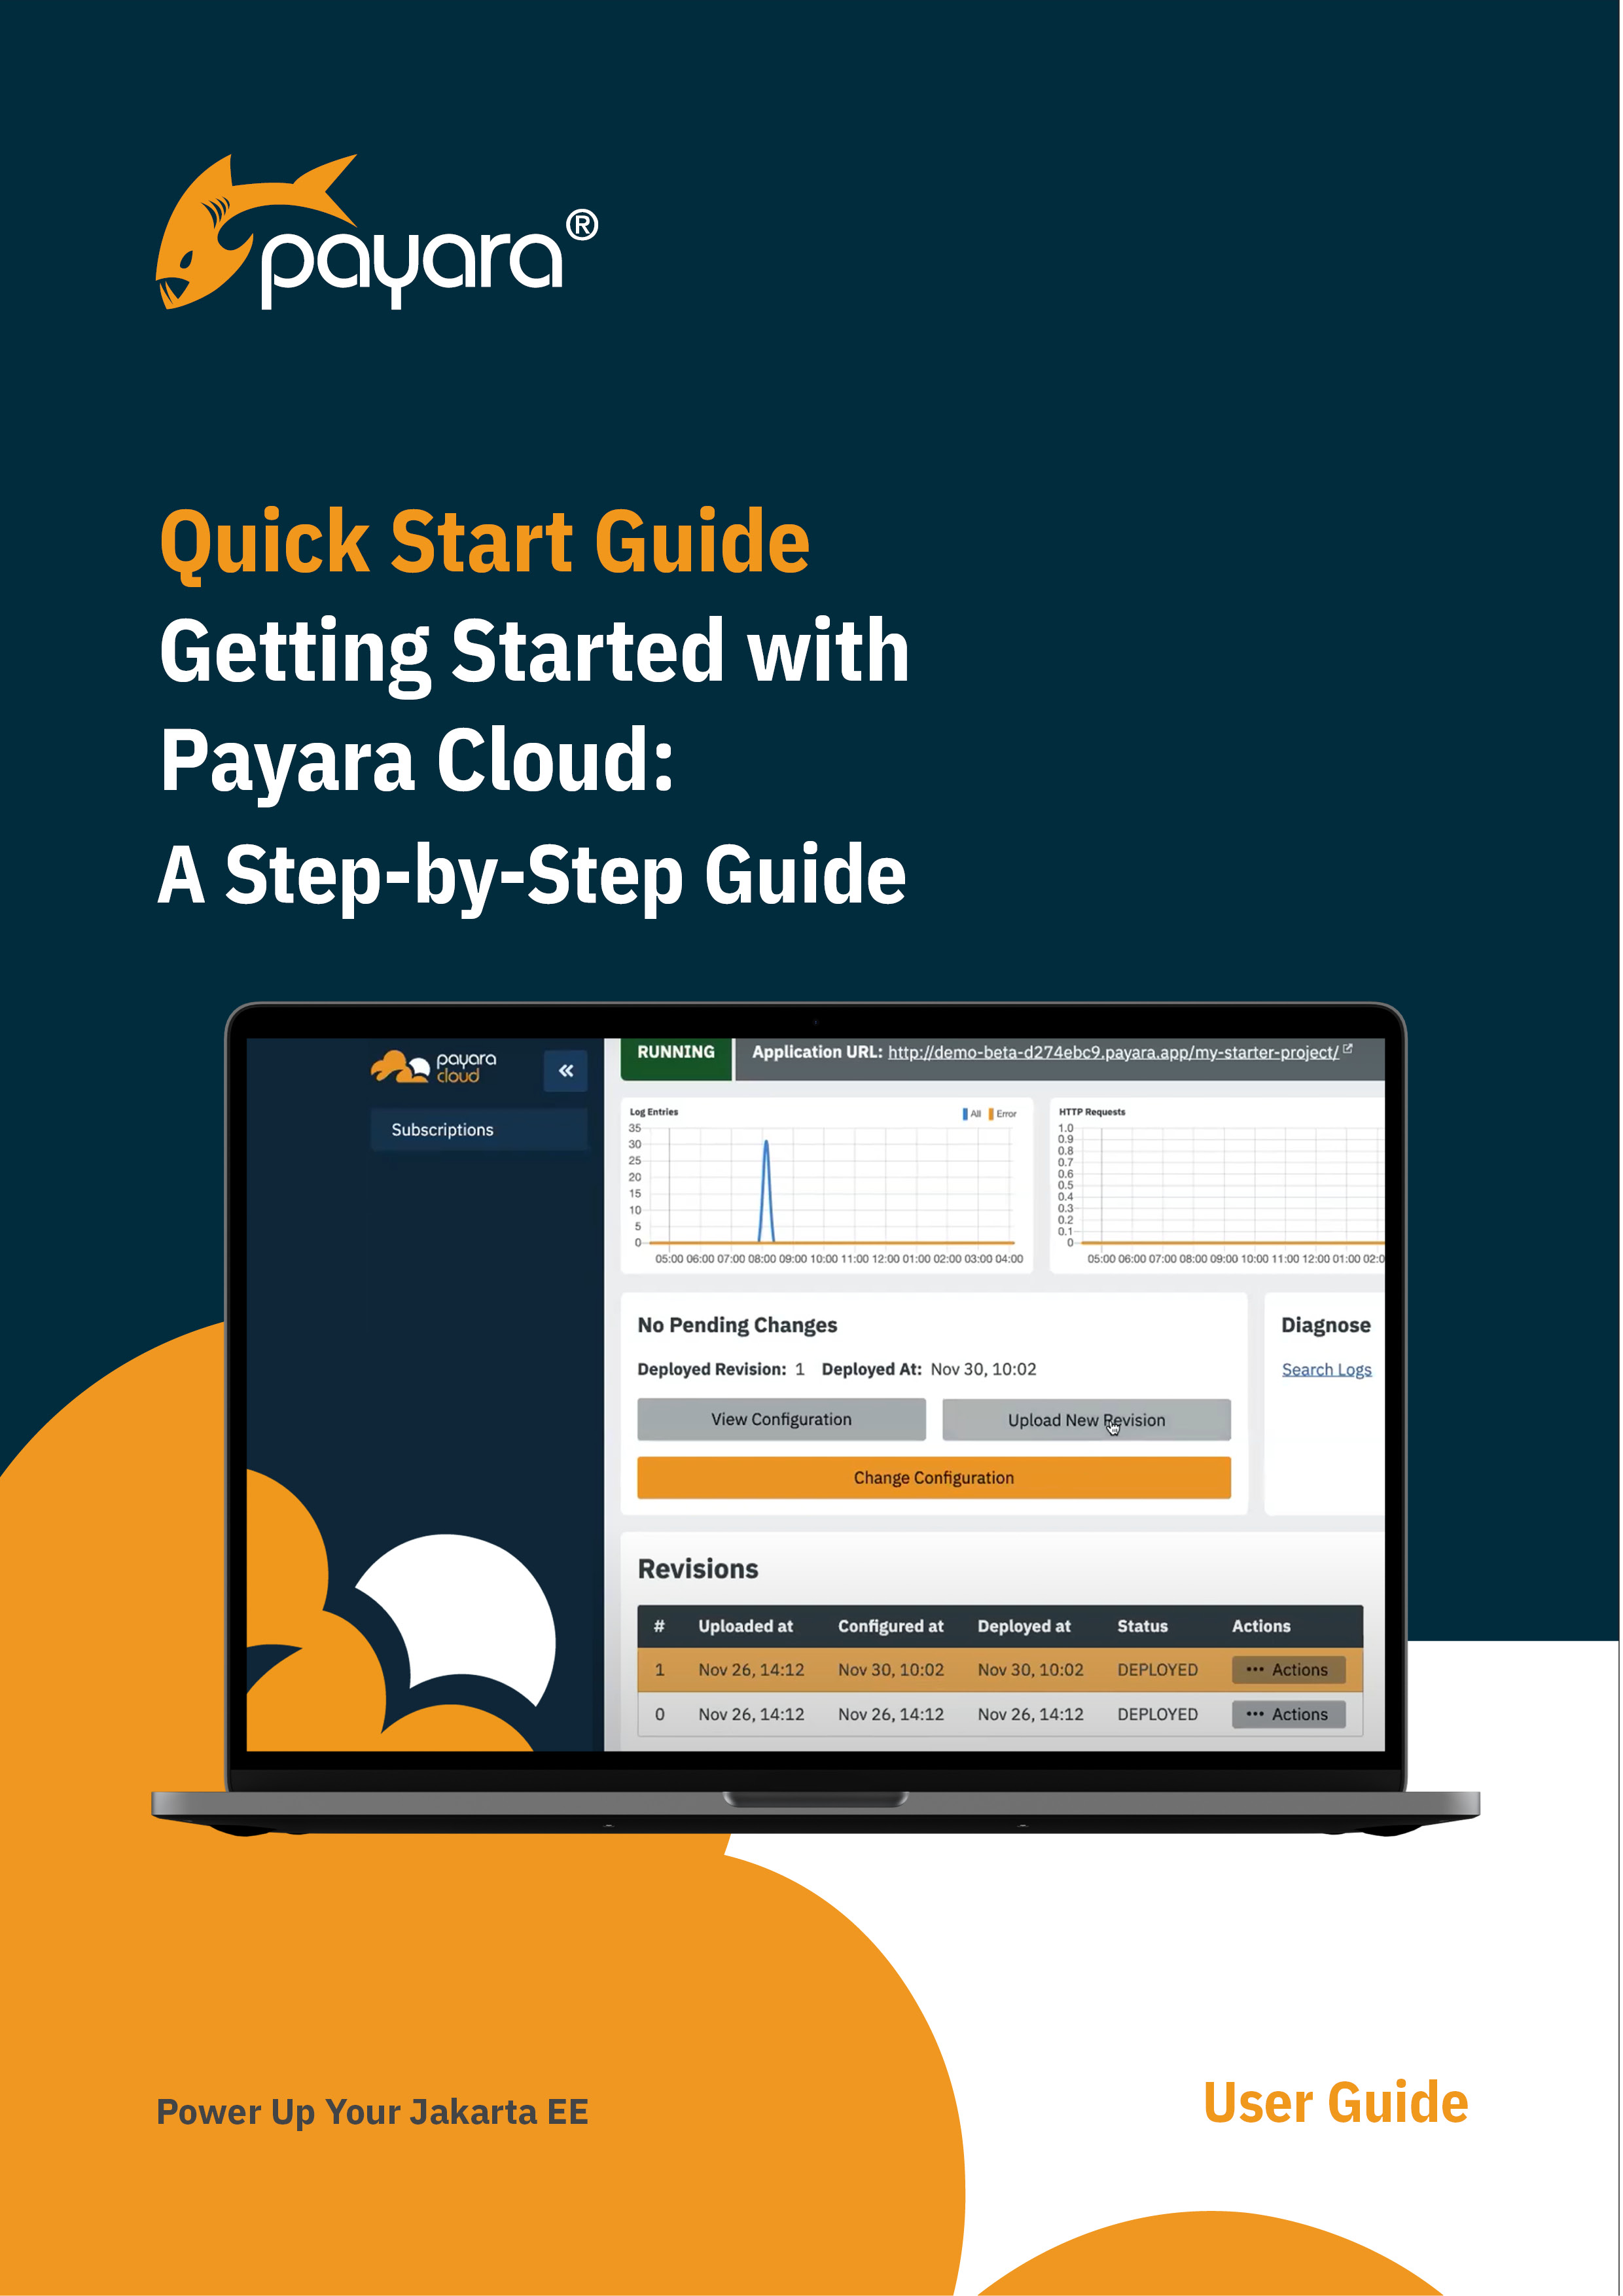 Download Quick Start Guide Getting Started with Payara Cloud: A Step-by-Step Guide